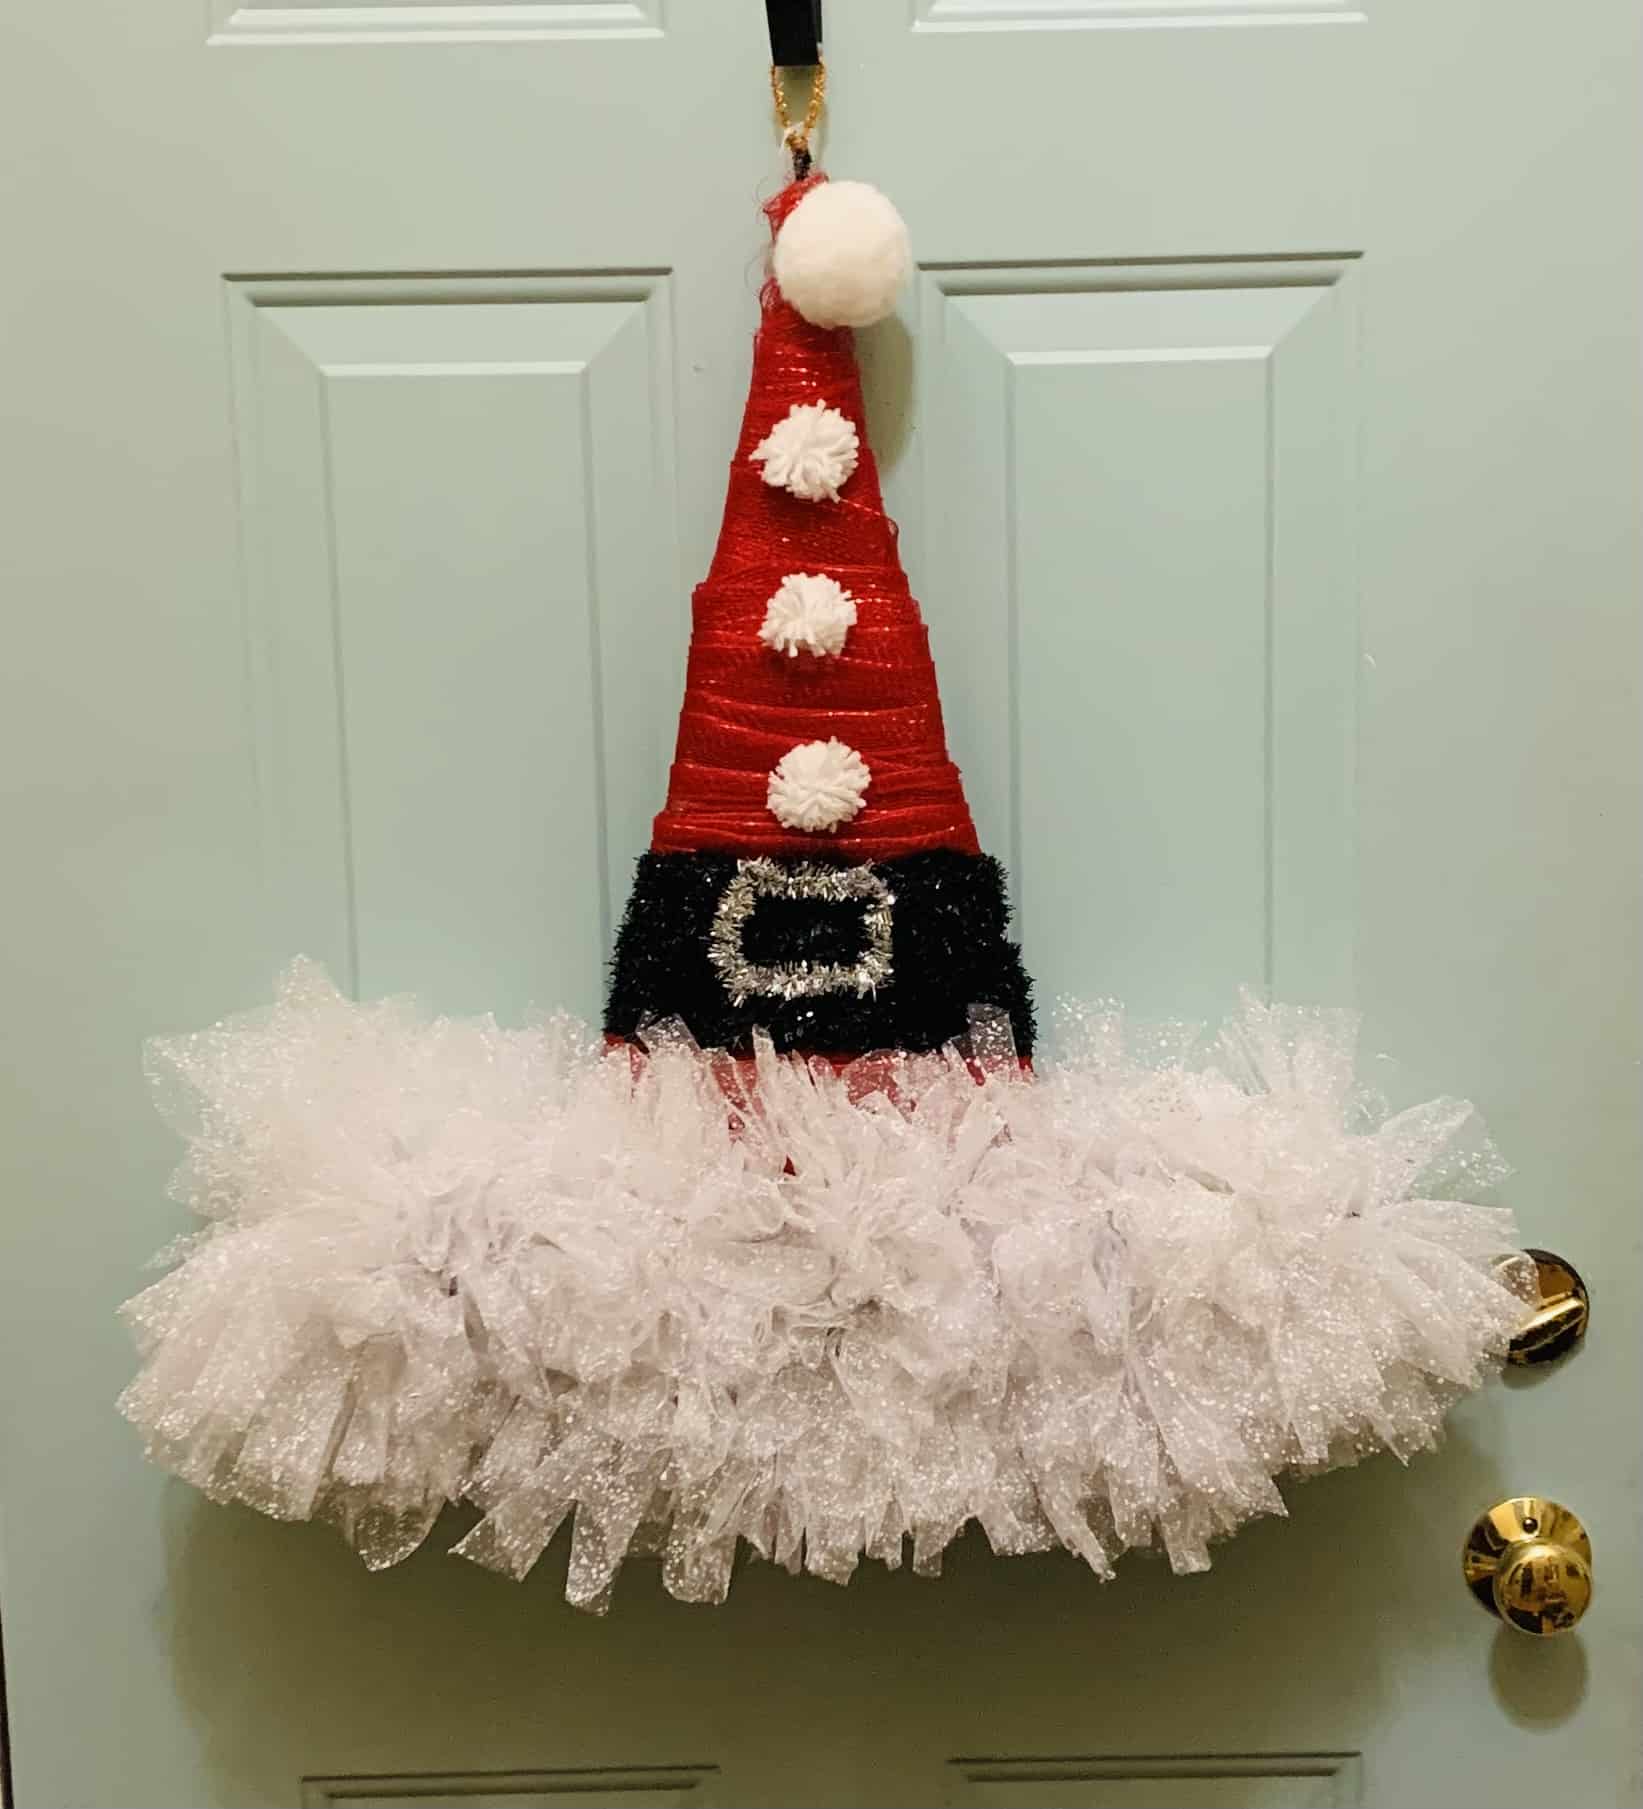 This Santa’s Belt Wreath is made with love by Willow Chic Designs! Shop more unique gift ideas today with Spots Initiatives, the best way to support creators.